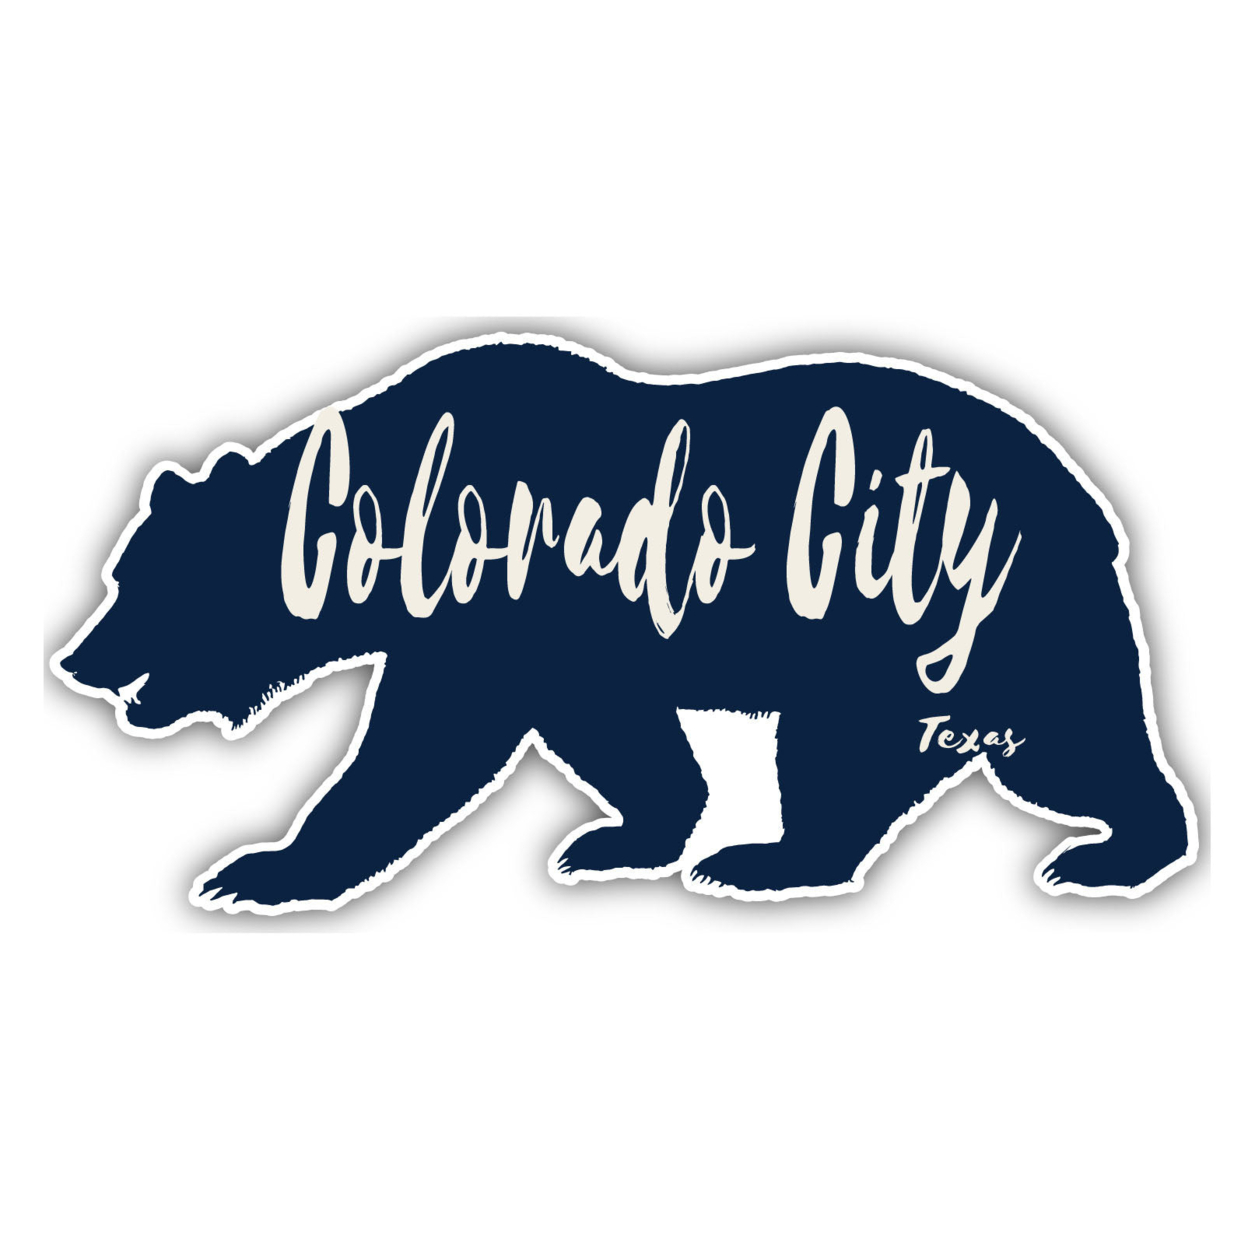 Colorado City Texas Souvenir Decorative Stickers (Choose Theme And Size) - 4-Pack, 6-Inch, Great Outdoors